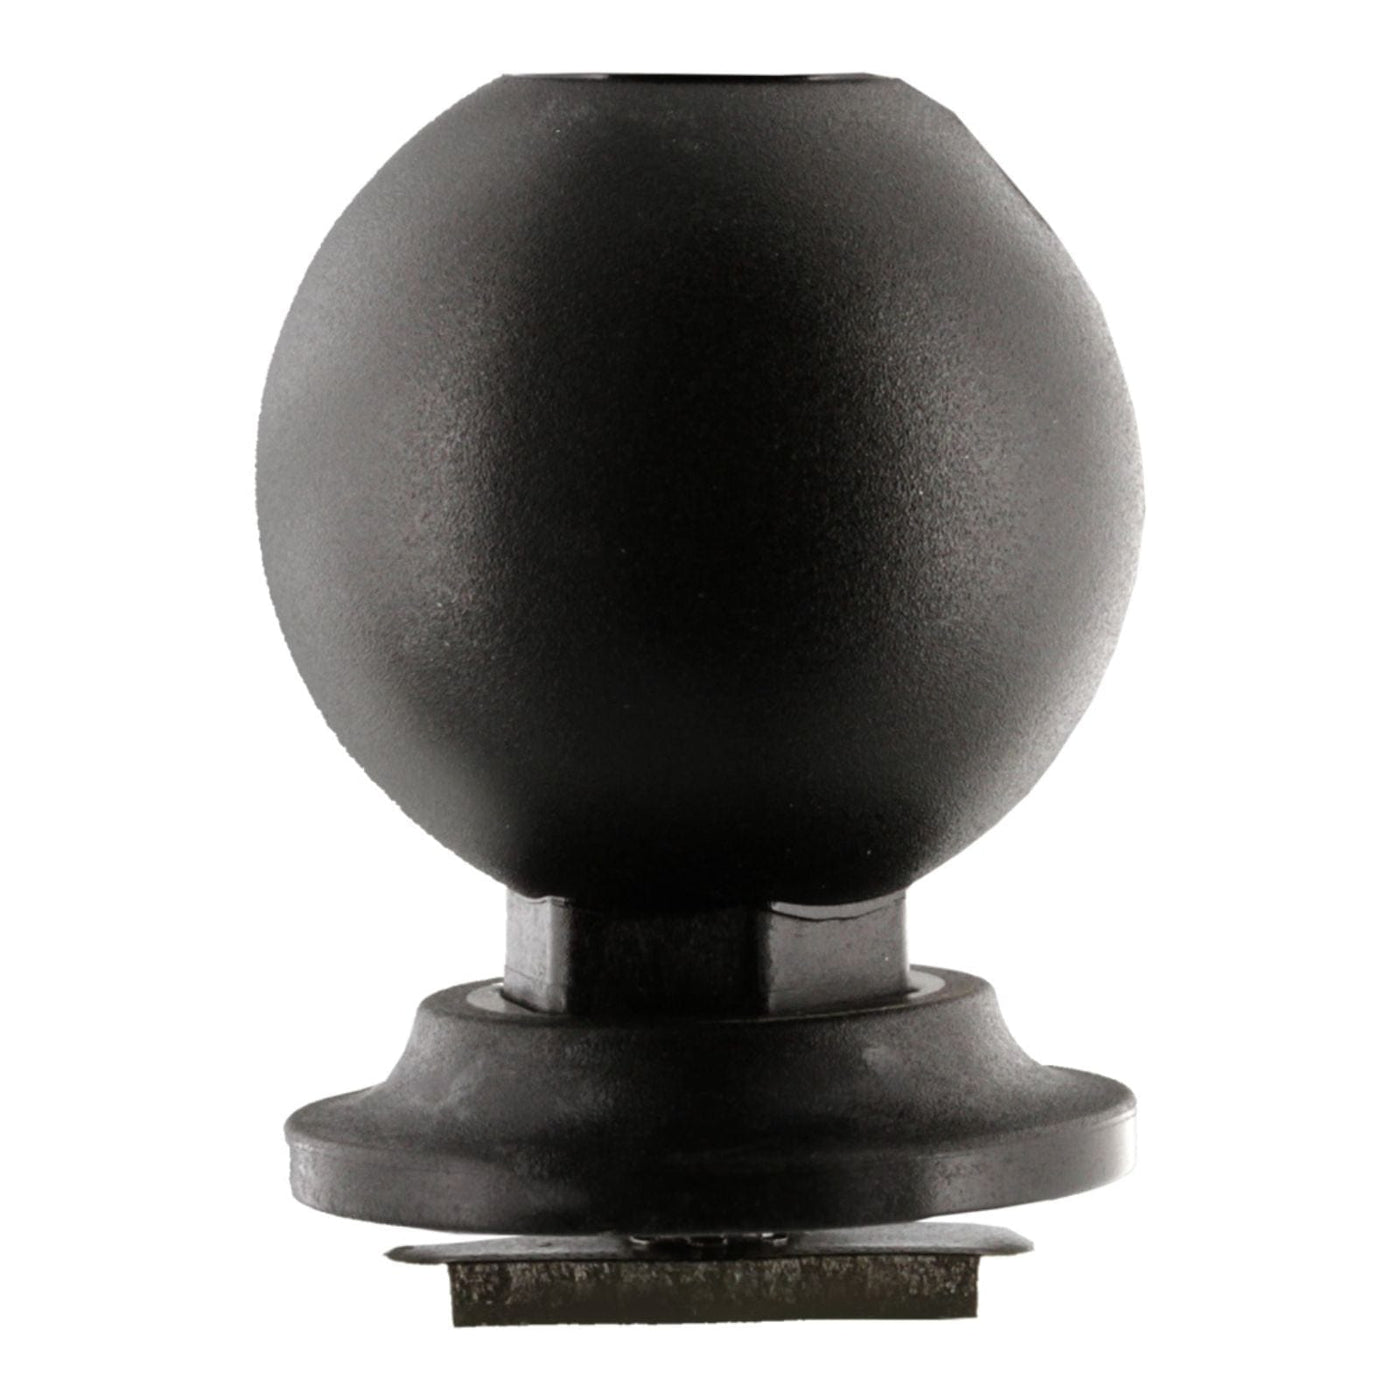 Scotty Scotty 1.5 Inch Ball with Low Profile Track Adaptor Marine And Water Sports